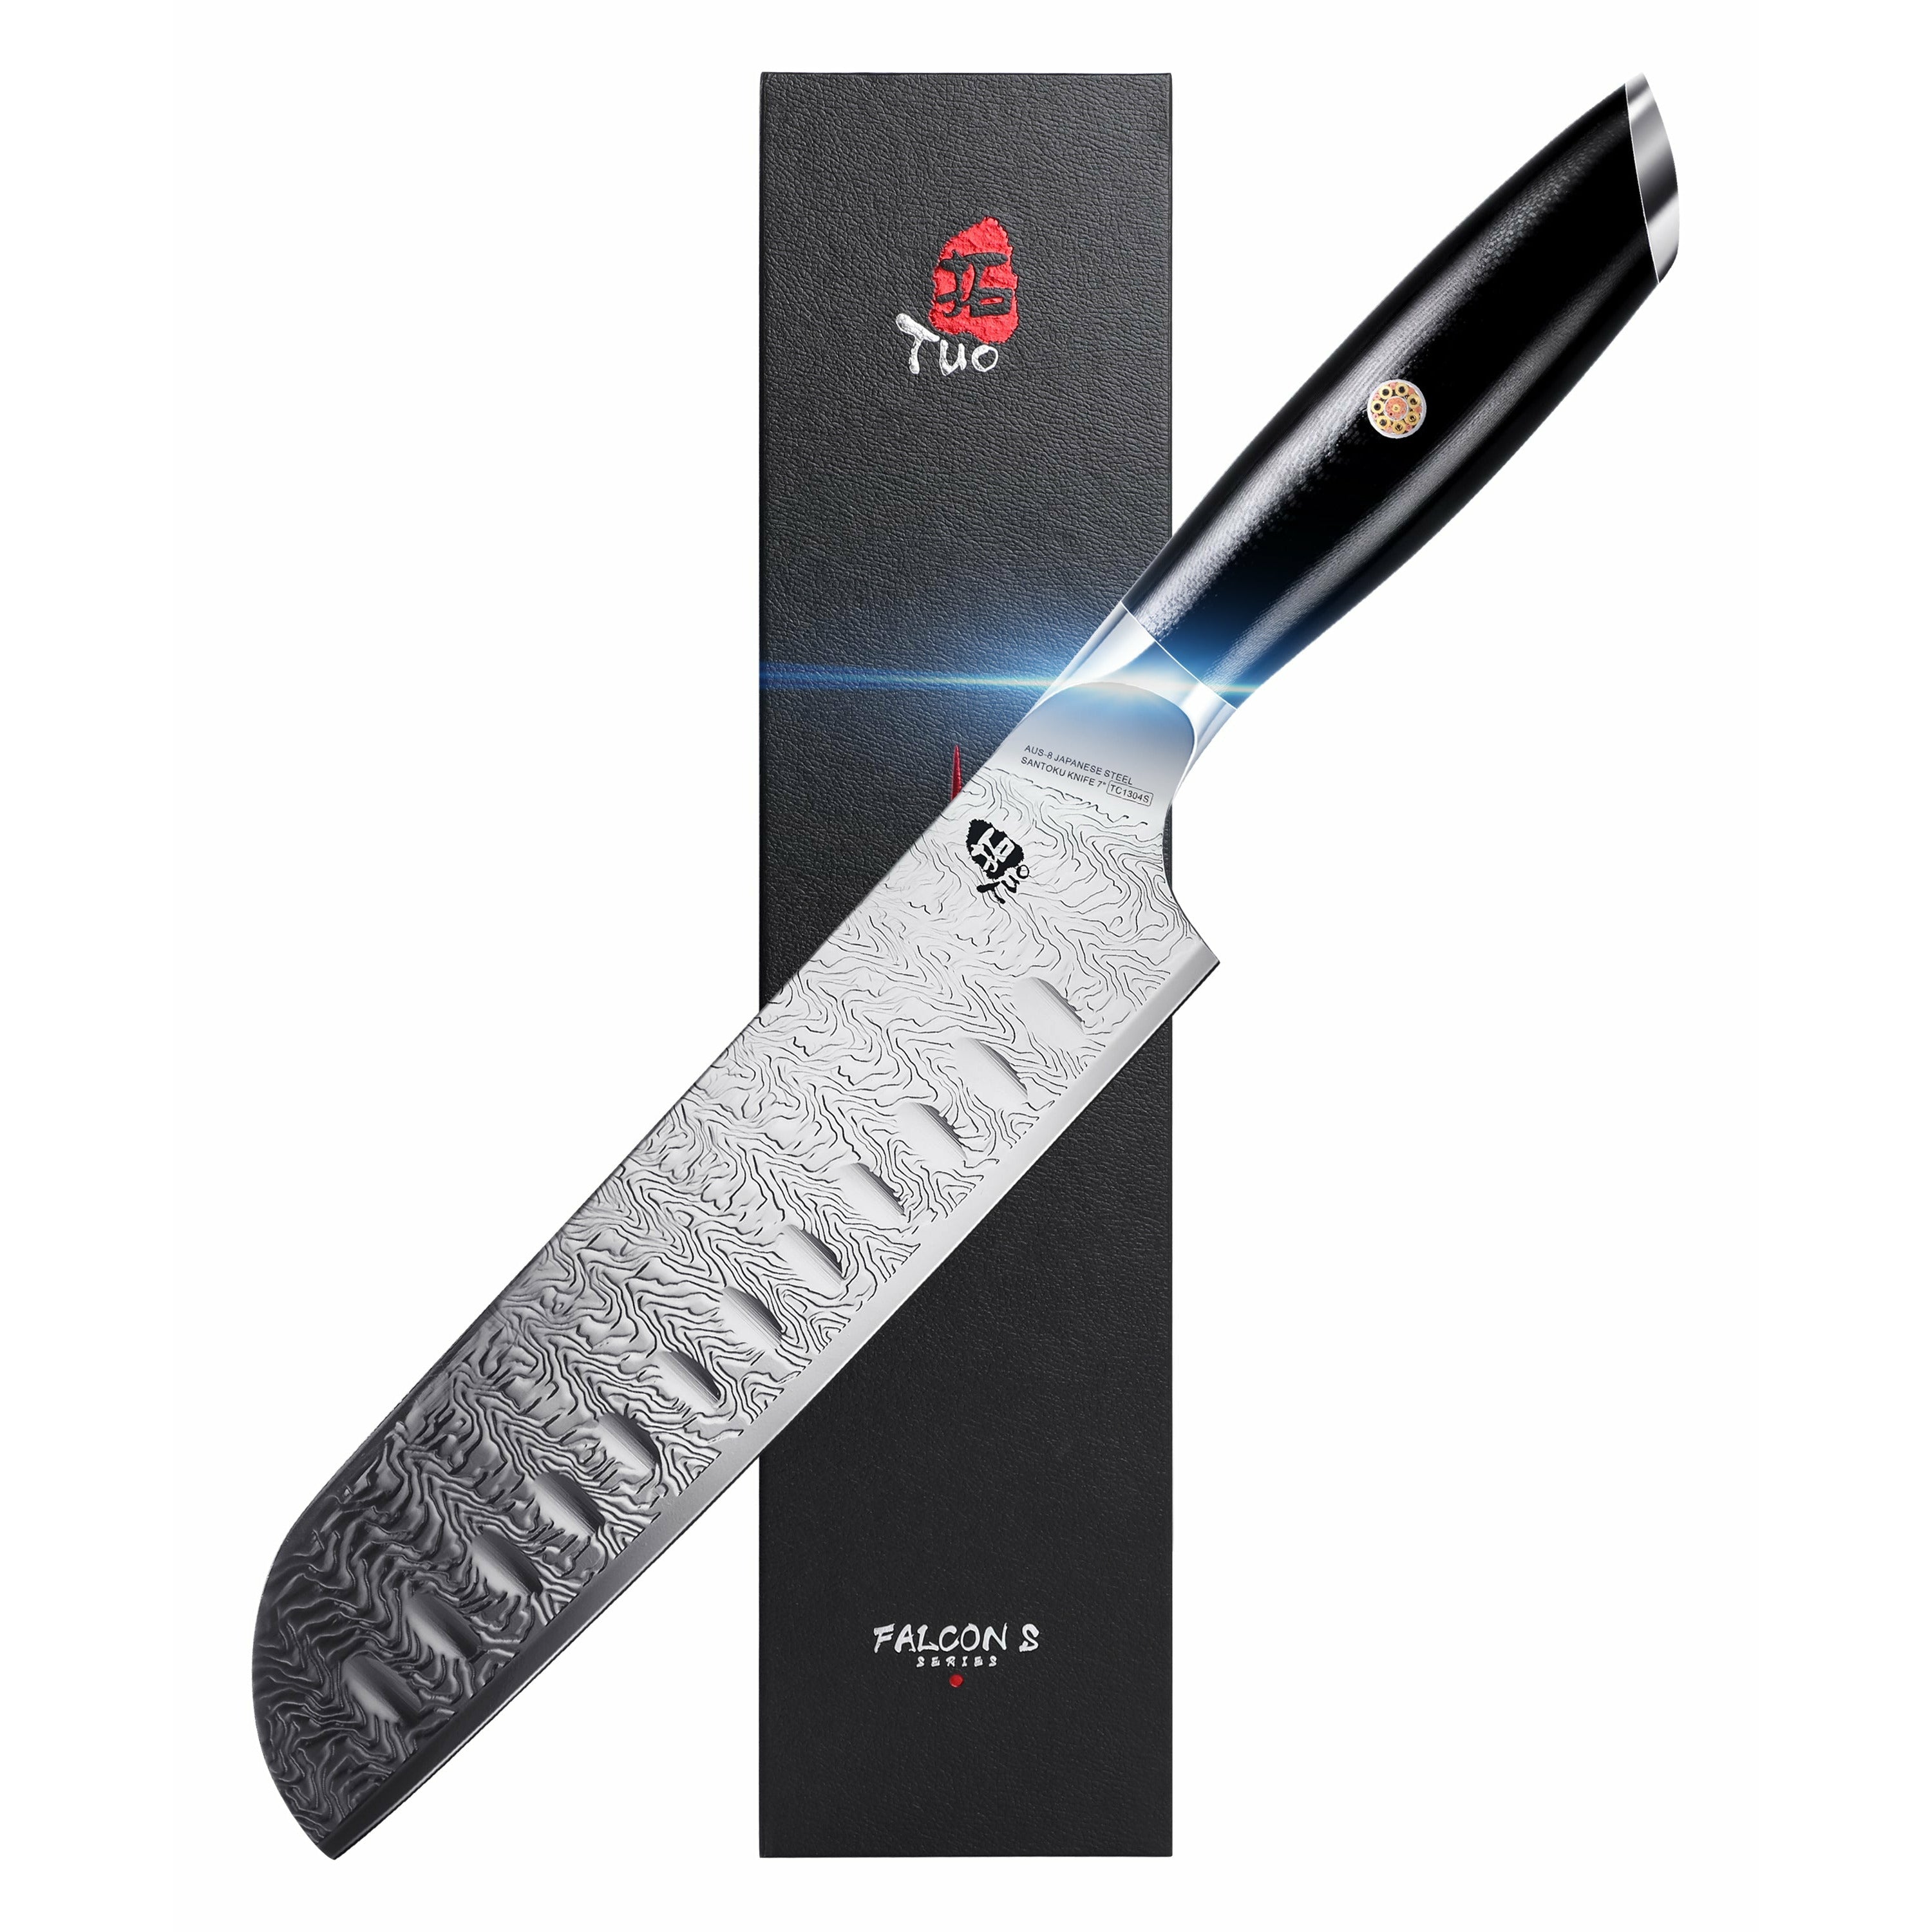 TUO Chef Knife - Kitchen Knives 8-inch High Carbon Stainless Steel - Pro  Chef Vegetable Meat Knife with G10 Full Tang Handle - Black Hawk-S Series